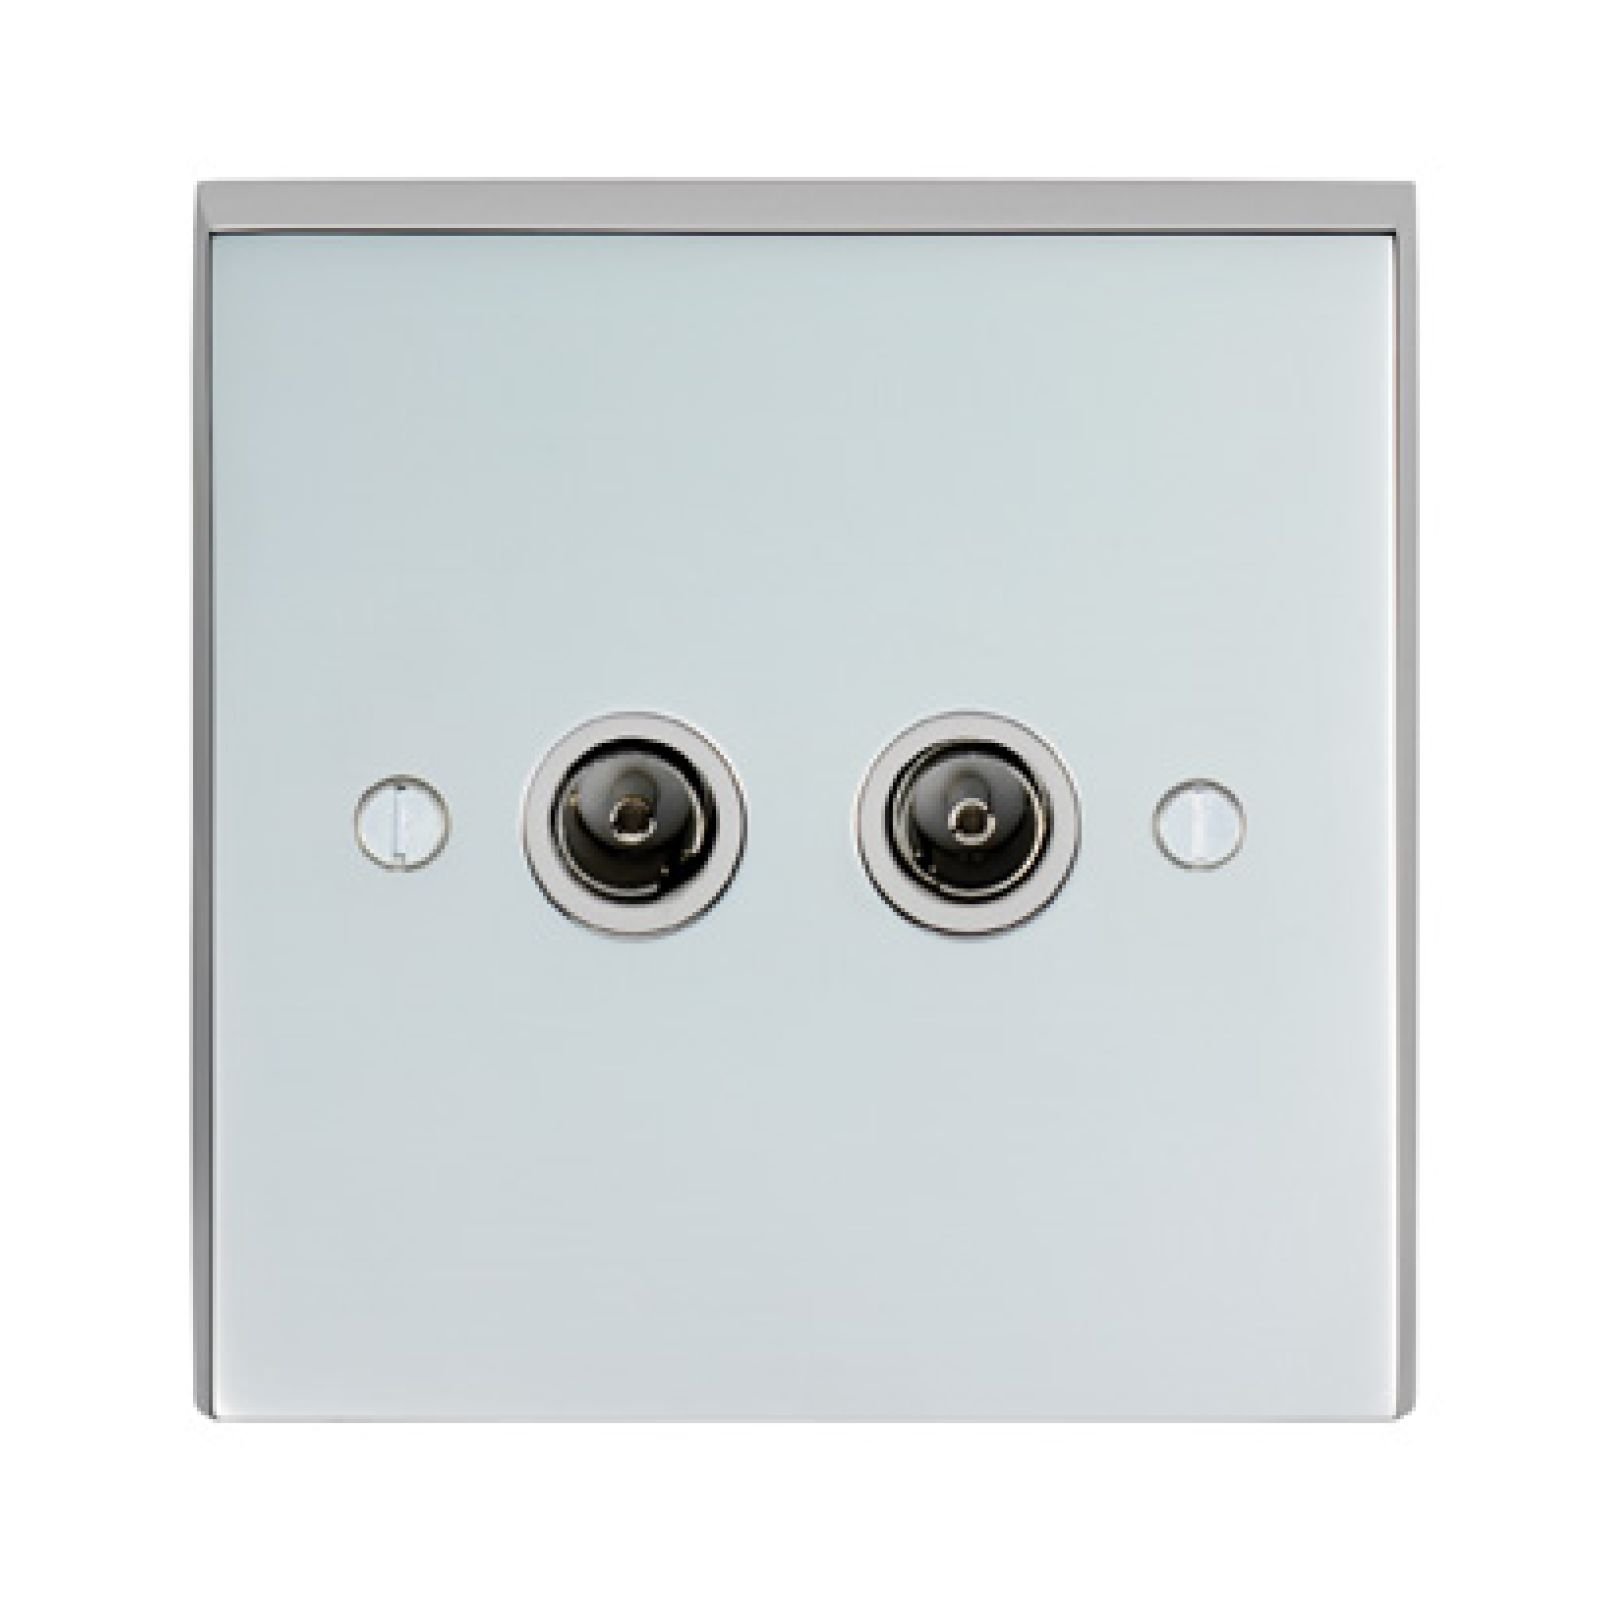 2 Gang TV Outlet in brass, chrome or satin chrome